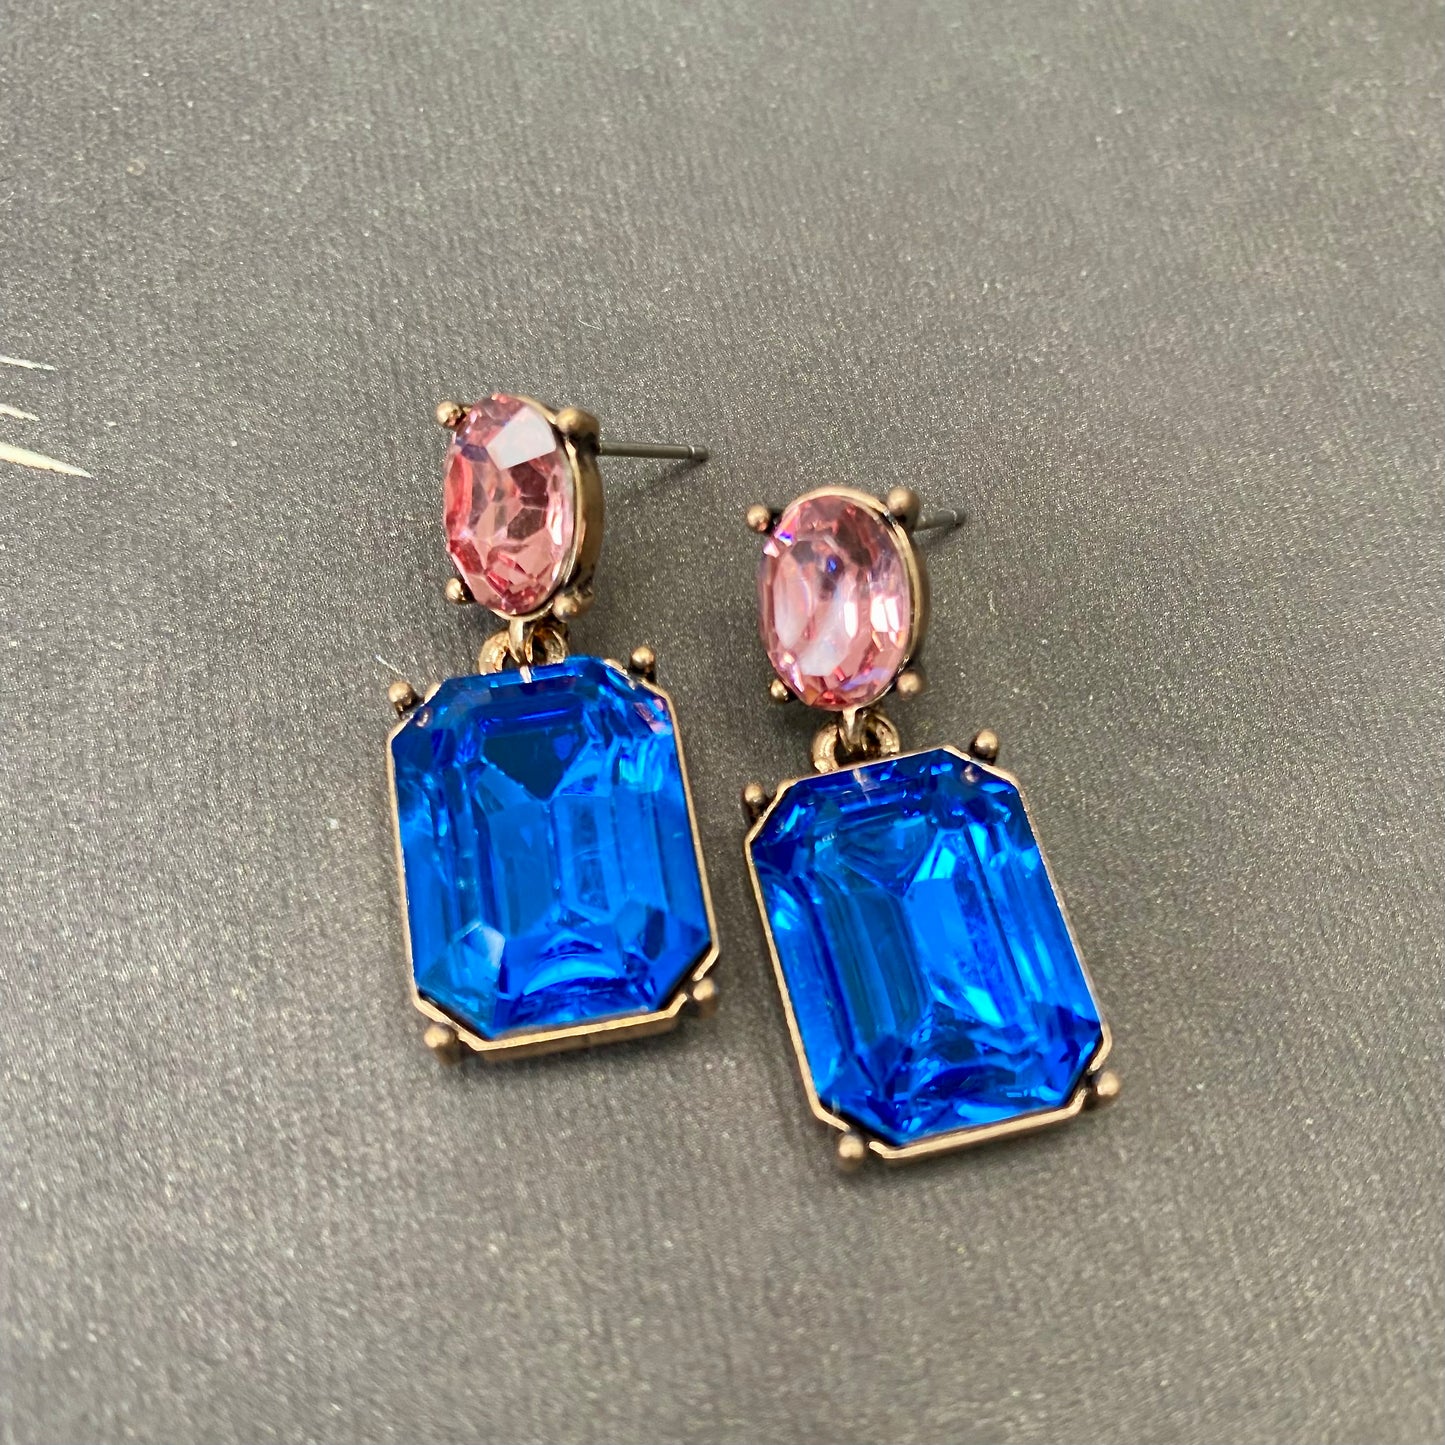      Vintage style colourful Glass Gem earrings     Post with butterfly back fastening     Hypo Allergenic (free from Nickel and Cadium)     Antique Gold plated zinc with Glass crystal     Measures 33mm approx     Available in  Hot Pink/Turquoise, Light Green/Yellow, Pinks, Yellow/Navy and Blue/Pink     FREE UK SHIPPING